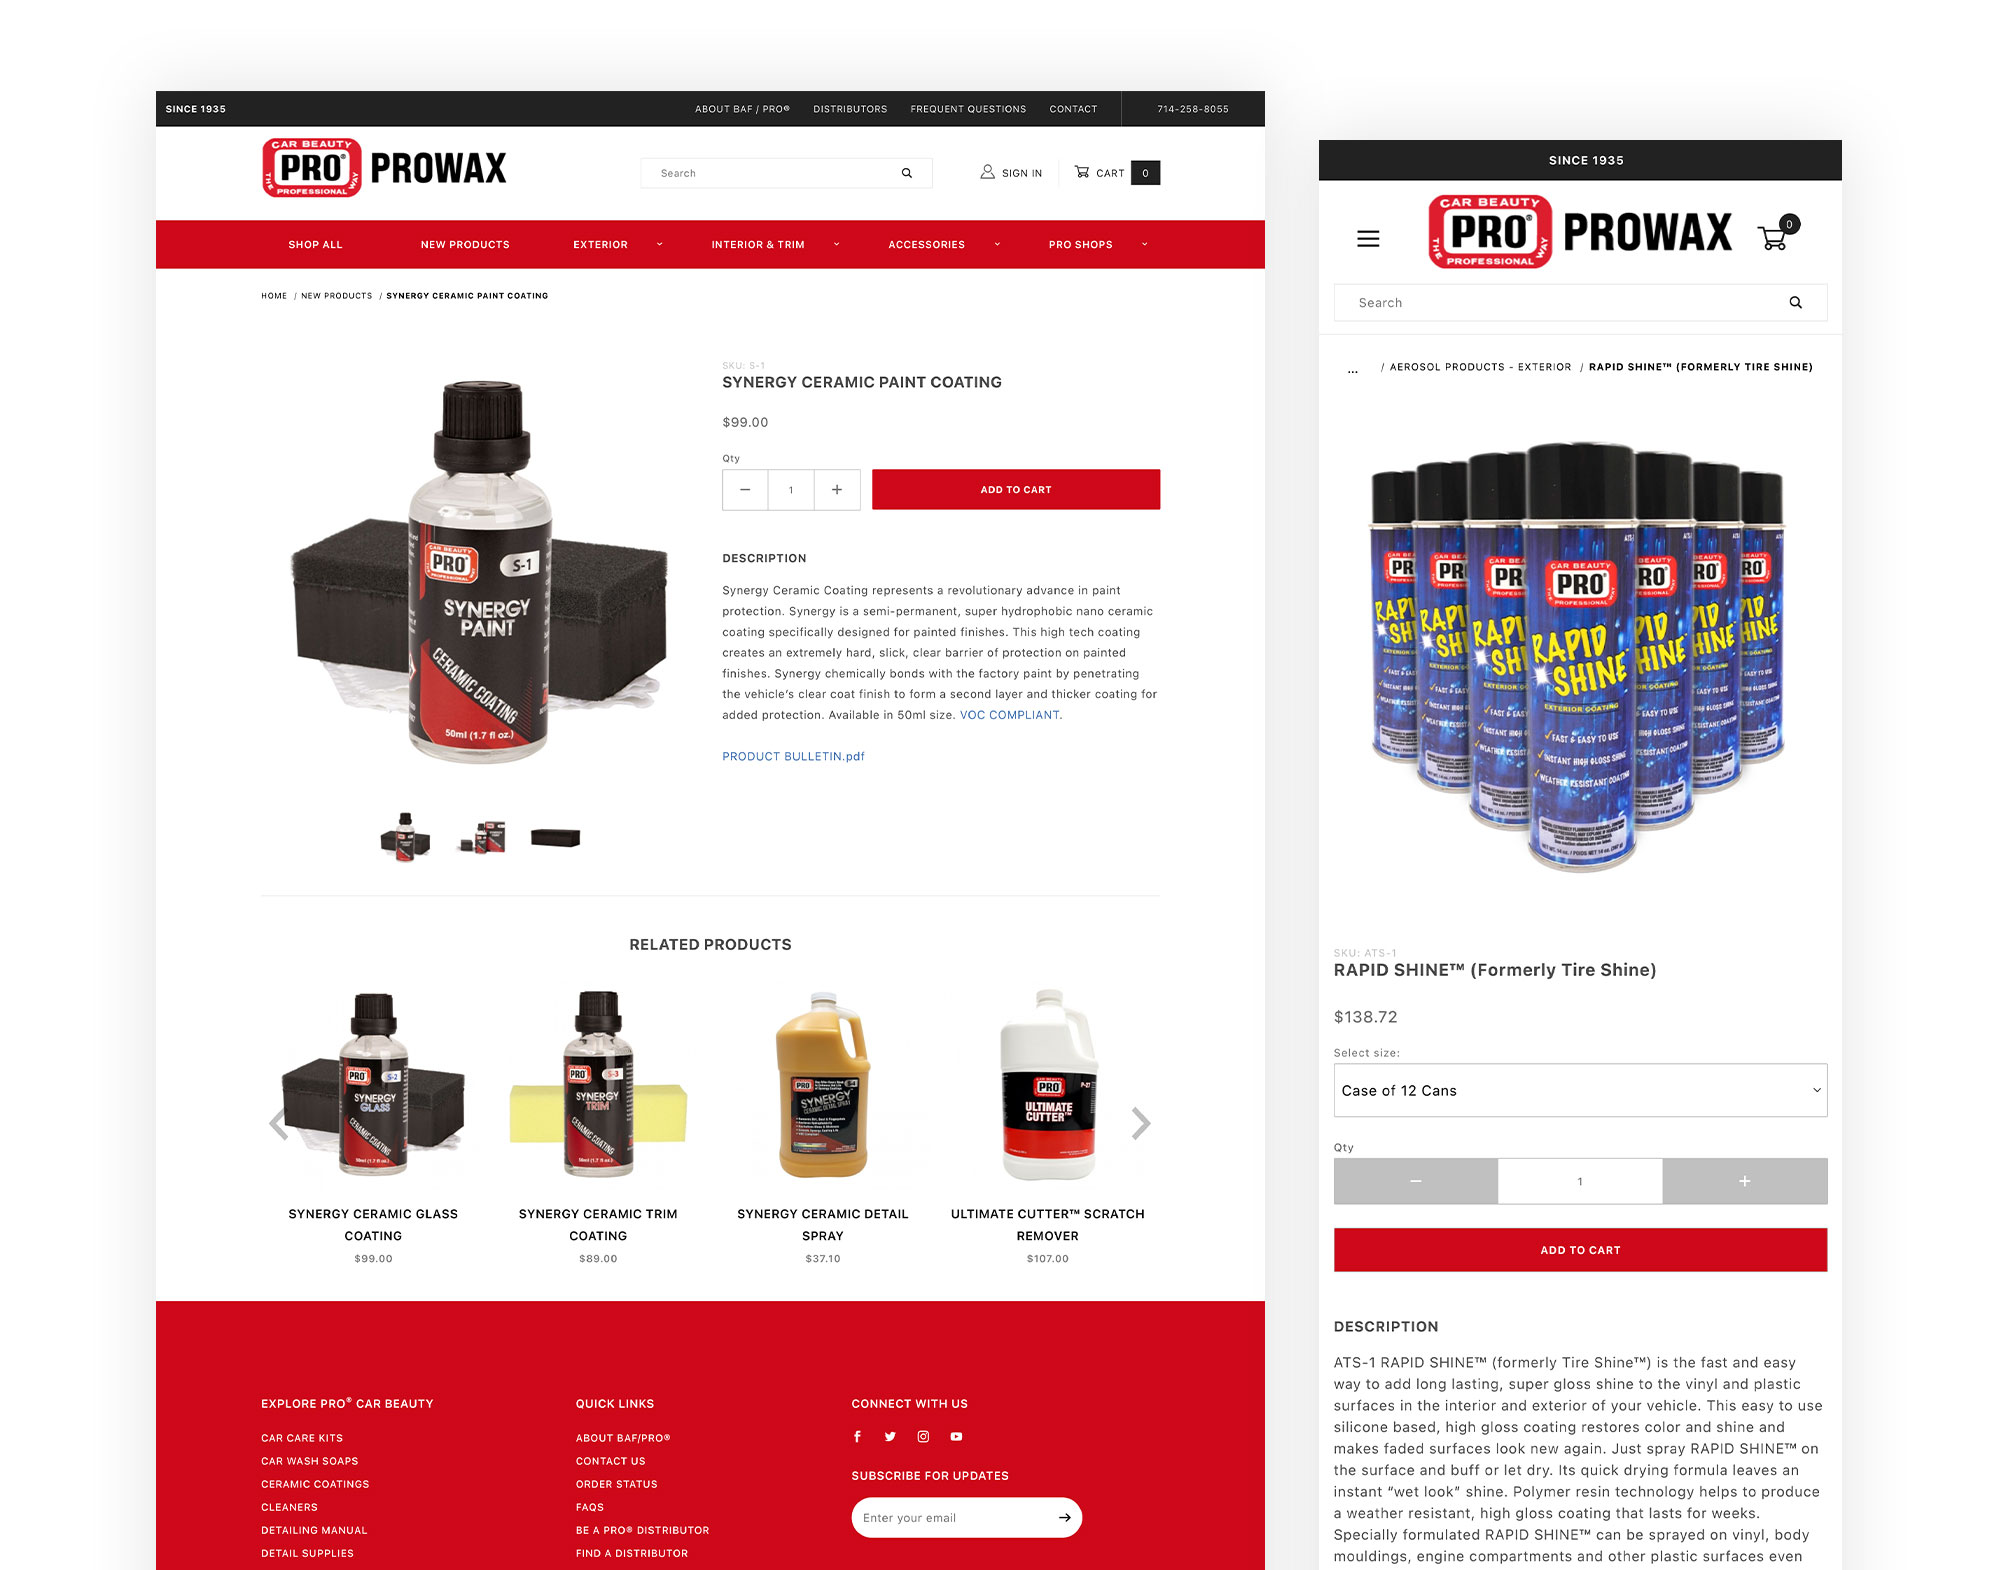 Prowax product pages